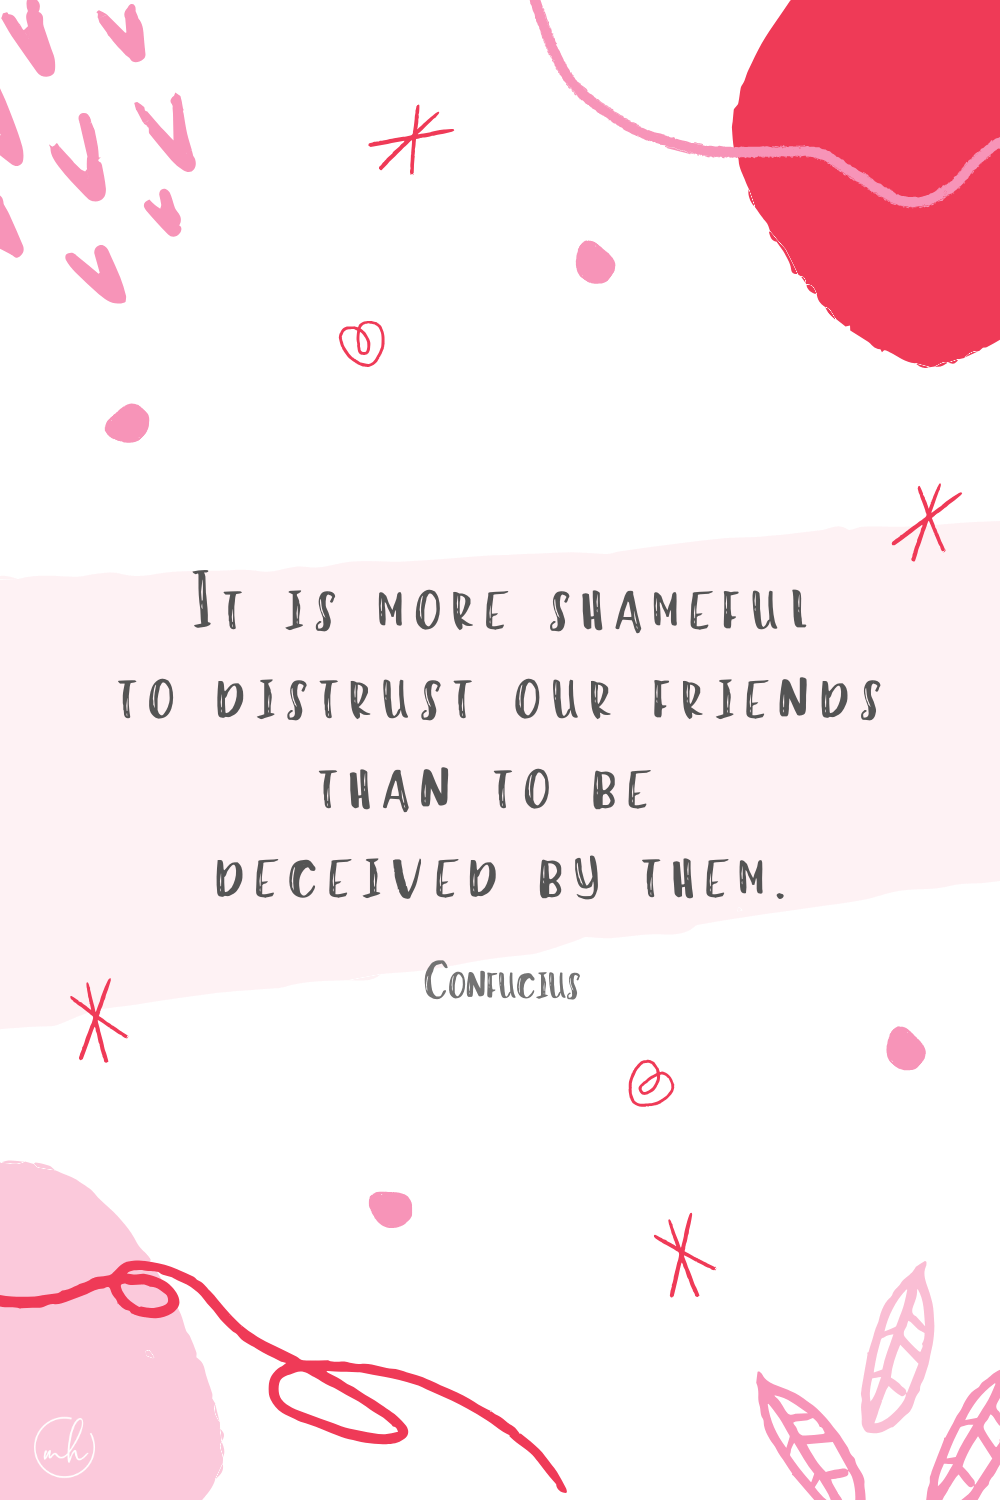 “It is more shameful to distrust our friends than to be deceived by them.” - Confucius